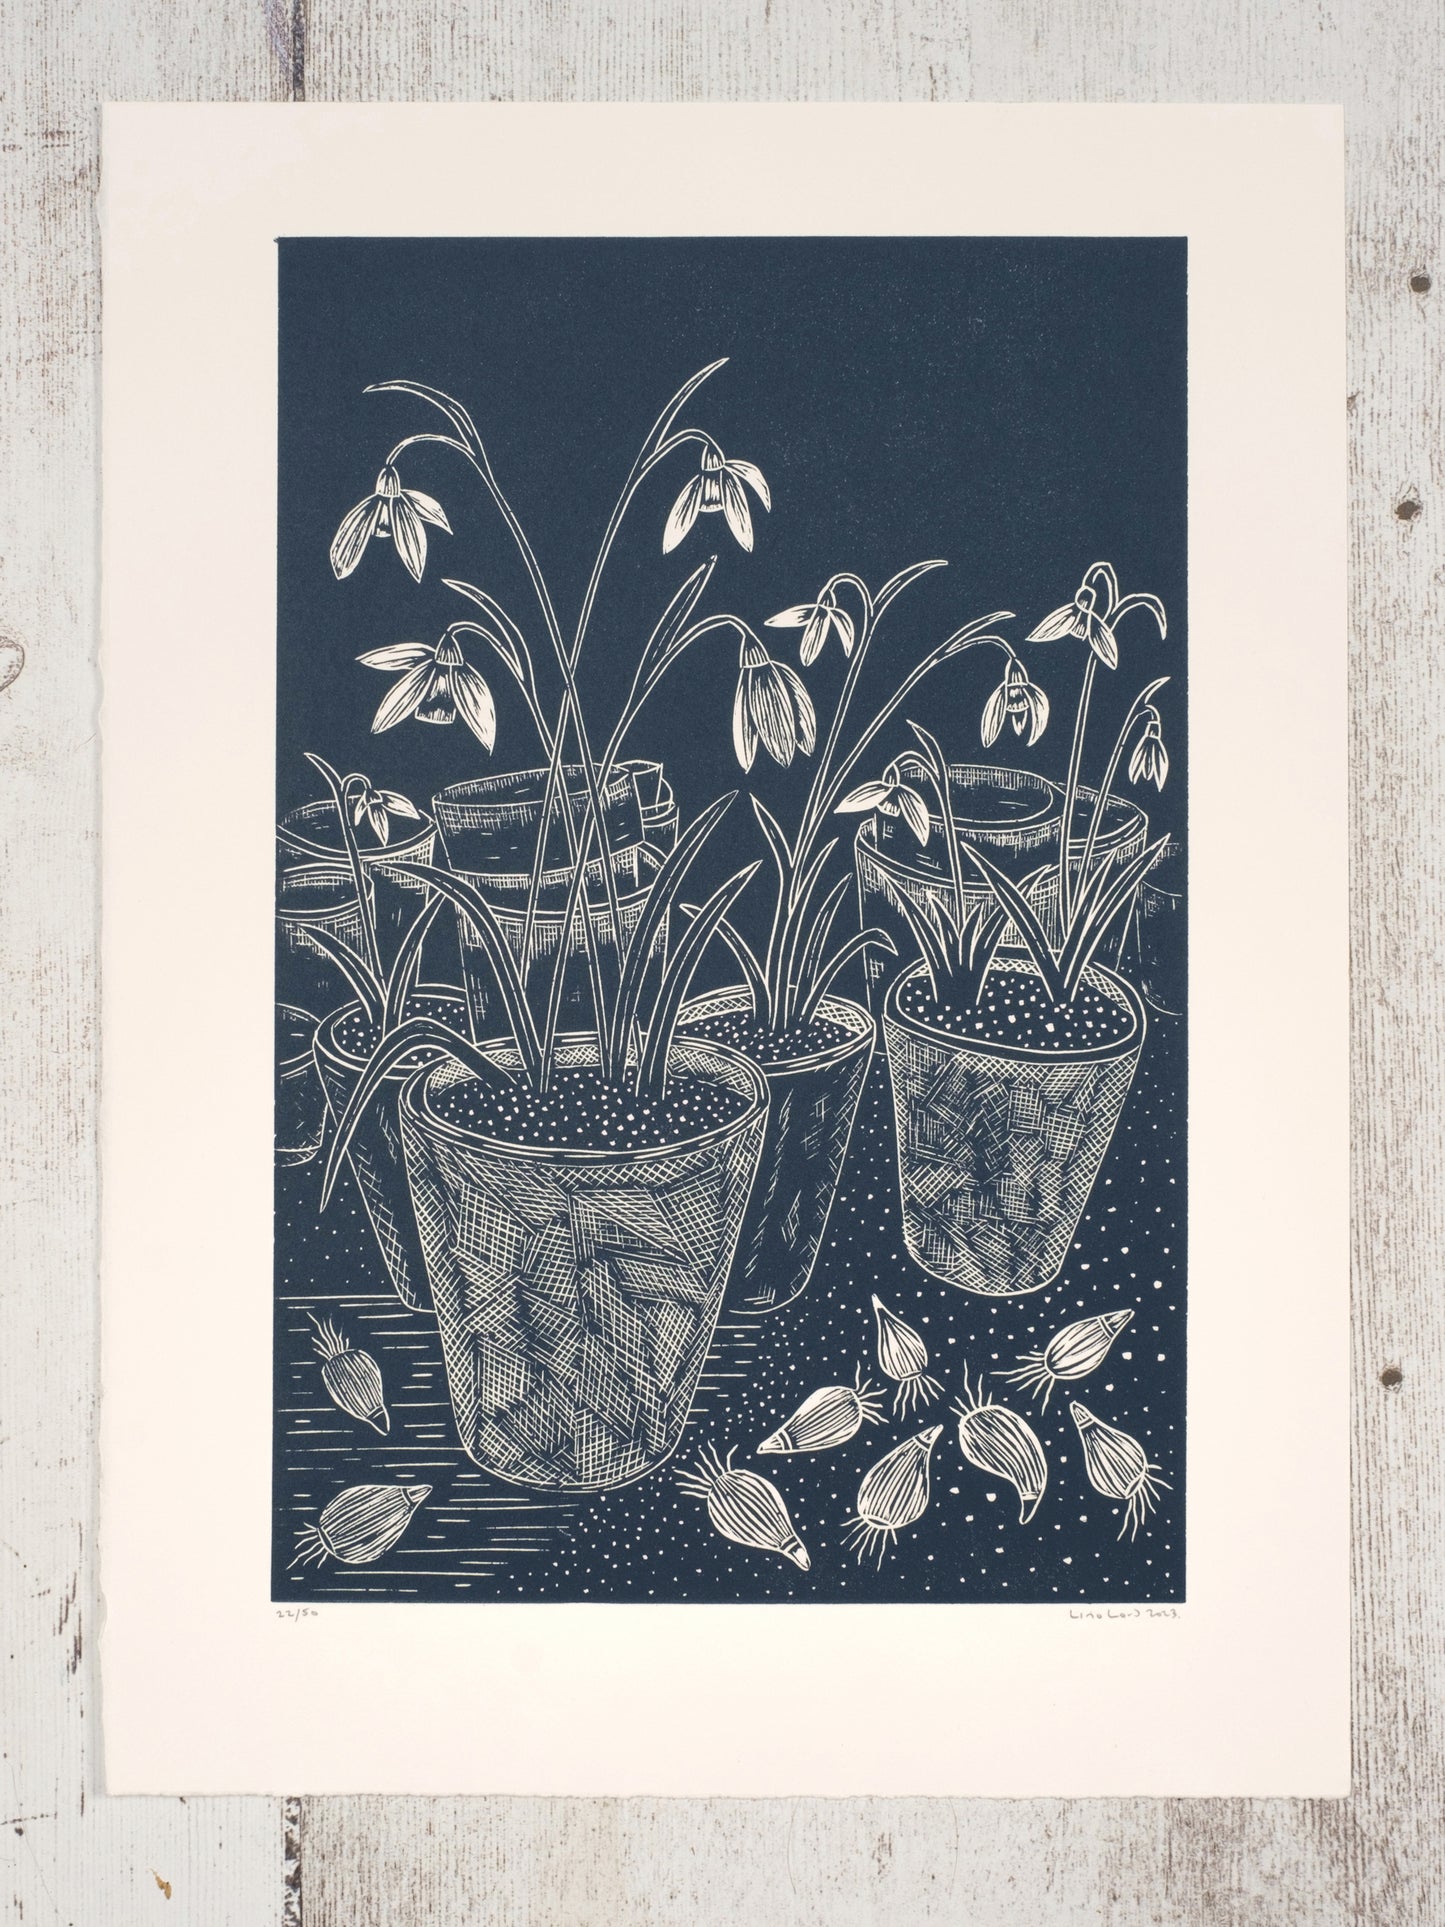 Snowdrops in Terracotta Pots in Potting Shed Lino Print